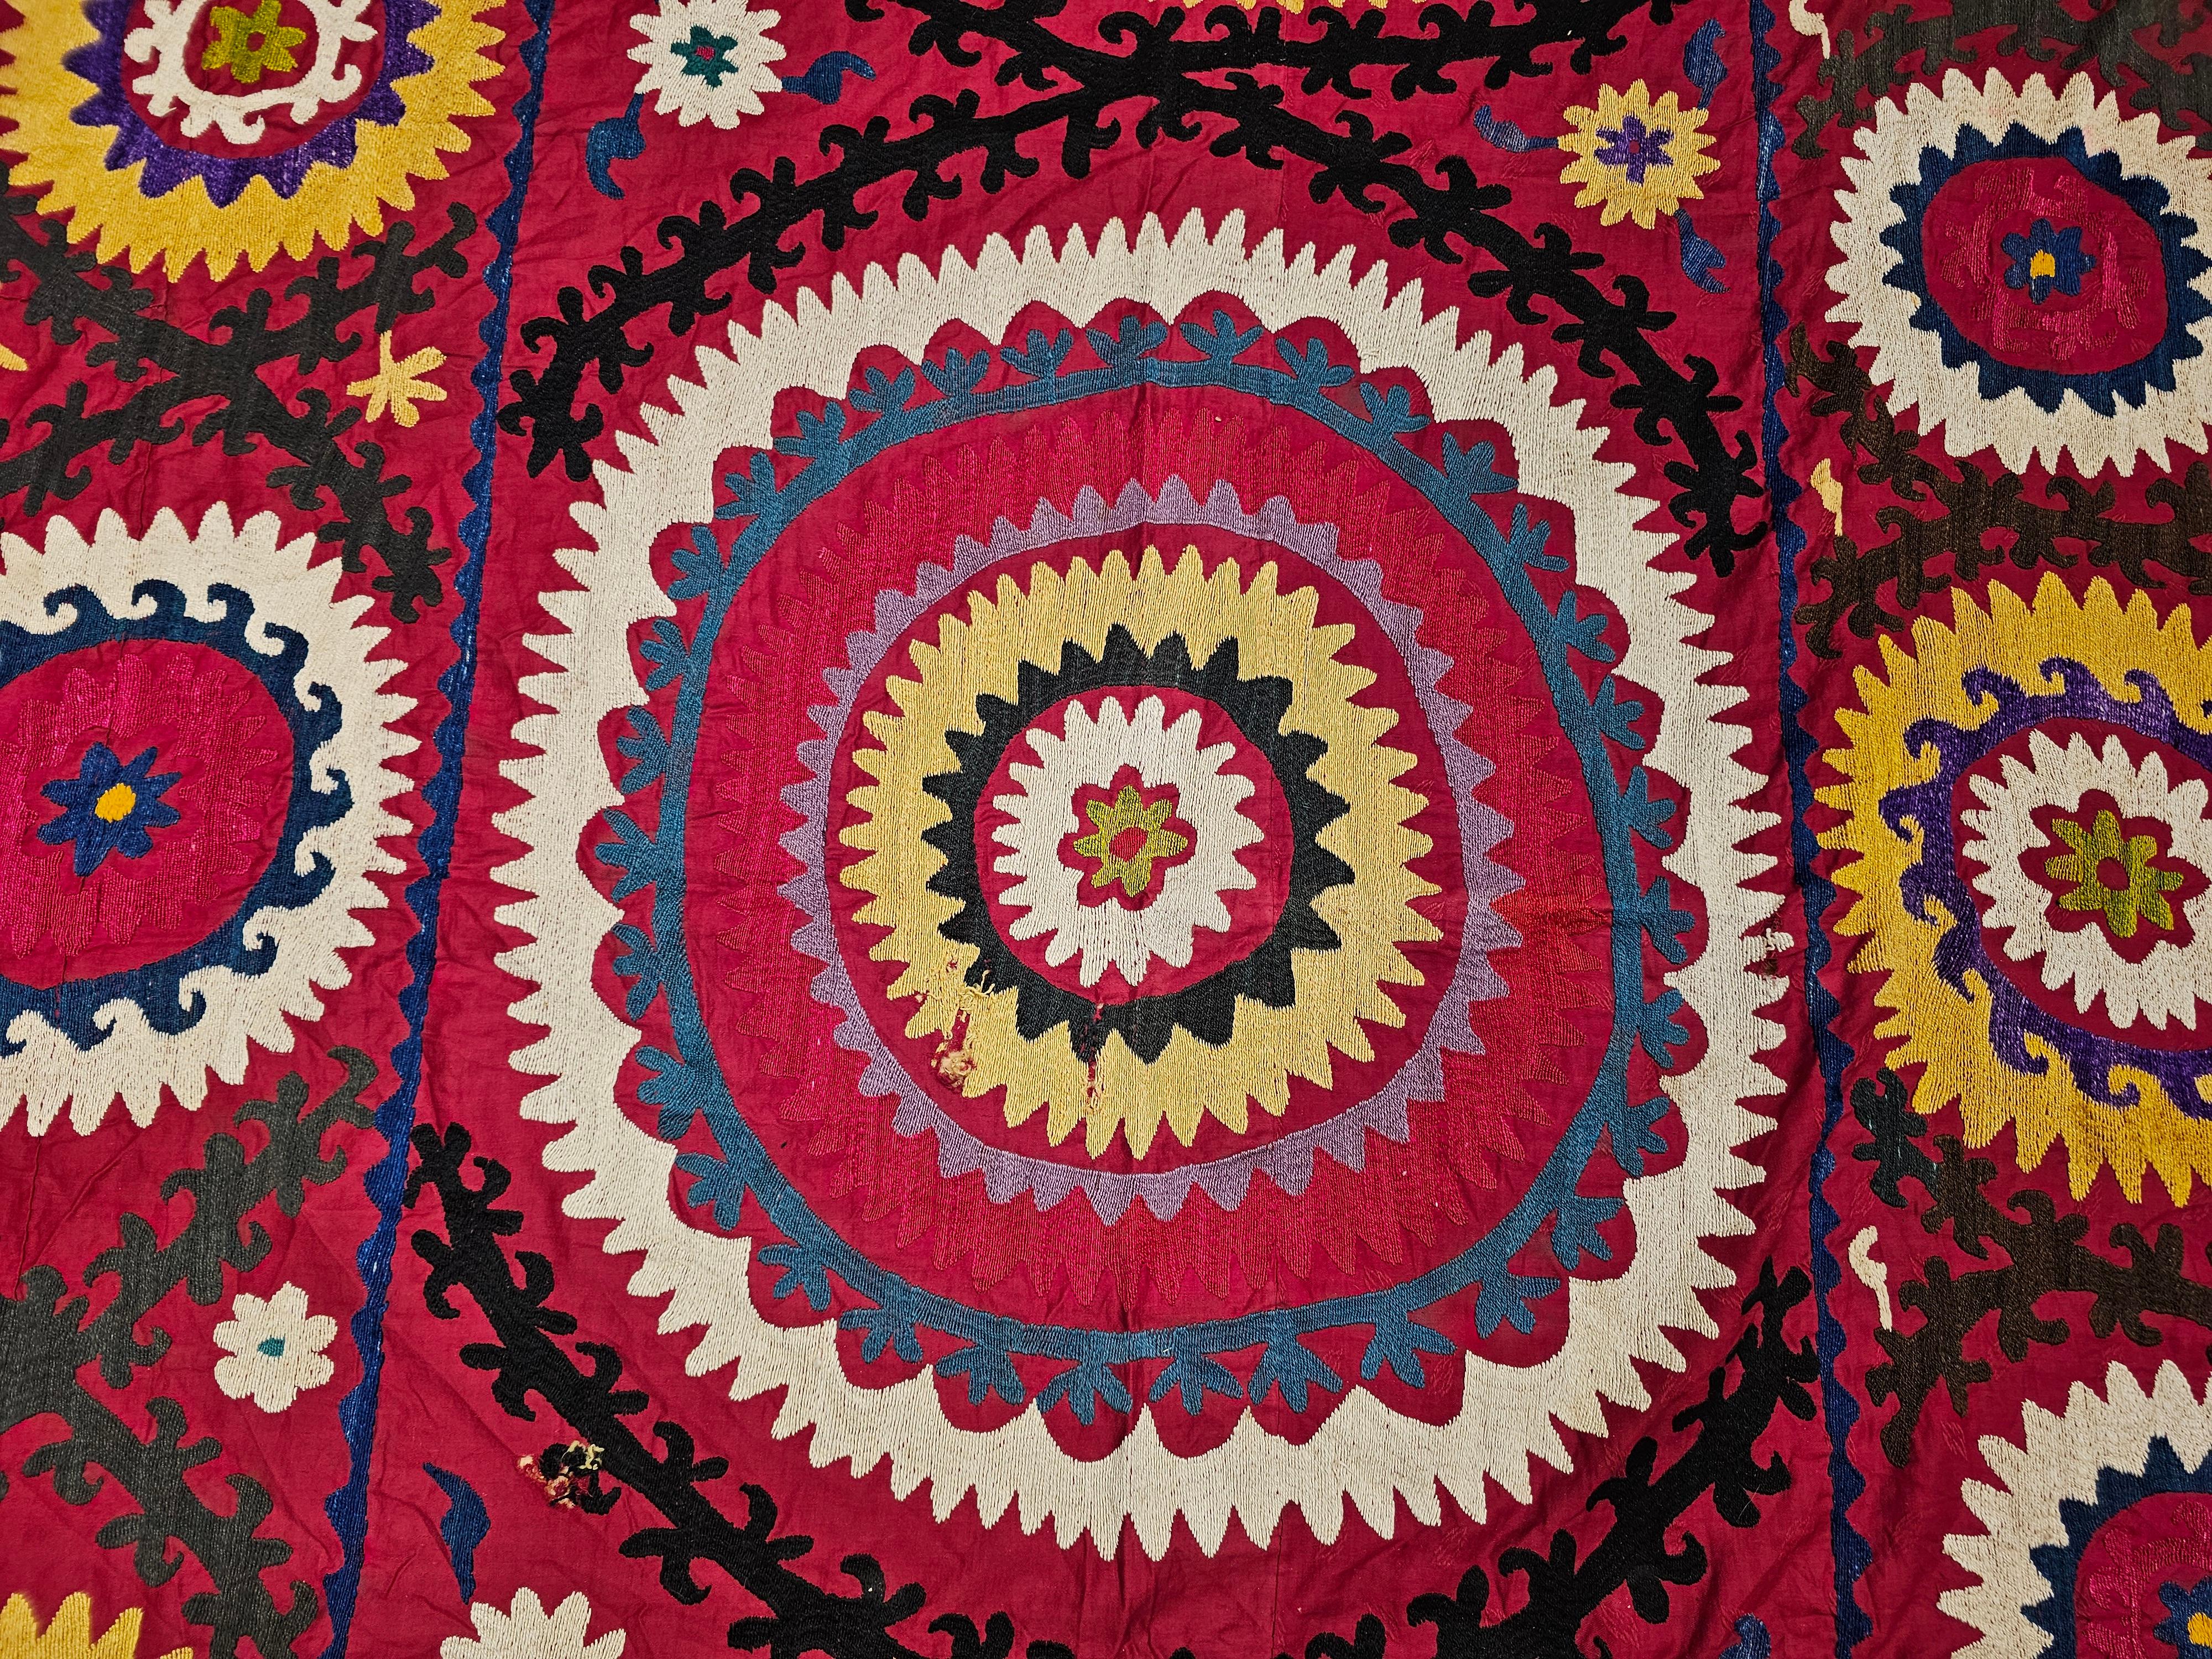 Vintage Uzbek Suzani Silk Embroidery in Crimson Red, Ivory, Blue, Yellow, Black For Sale 2